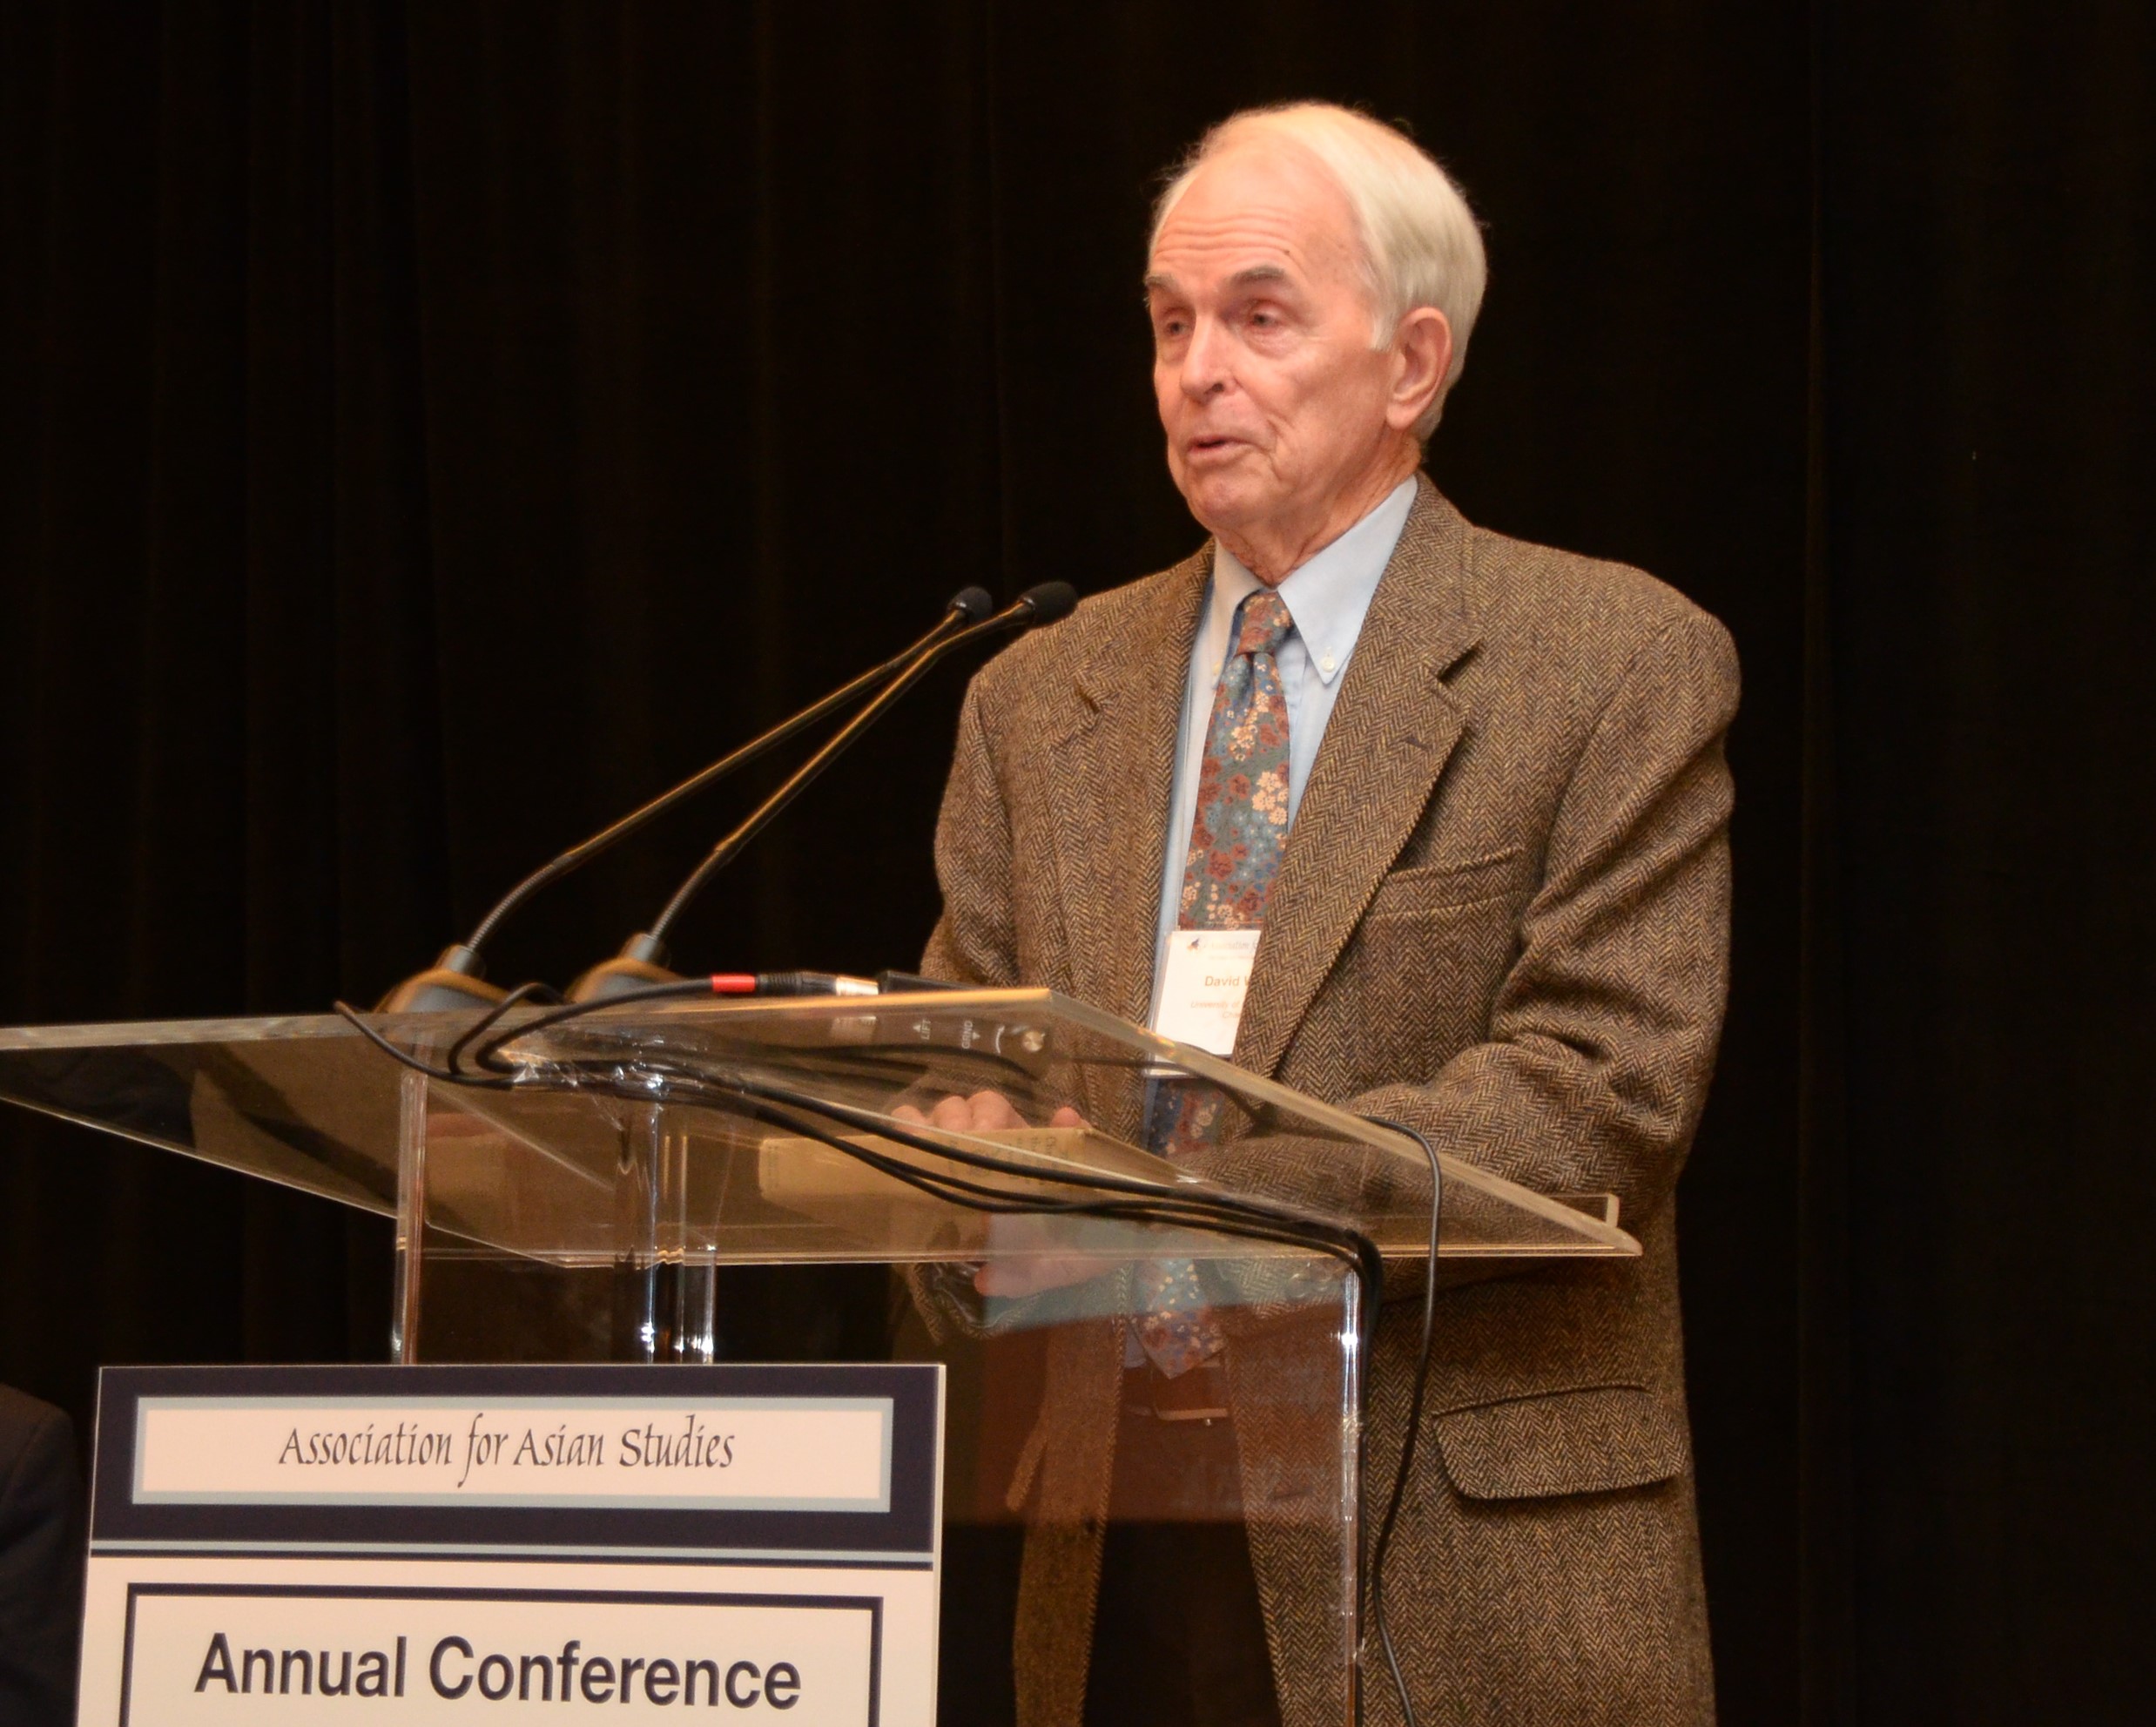 David W. Plath accepting the Distinguished Contributions to Asian Studies award at the AAS 2013 Annual Conference